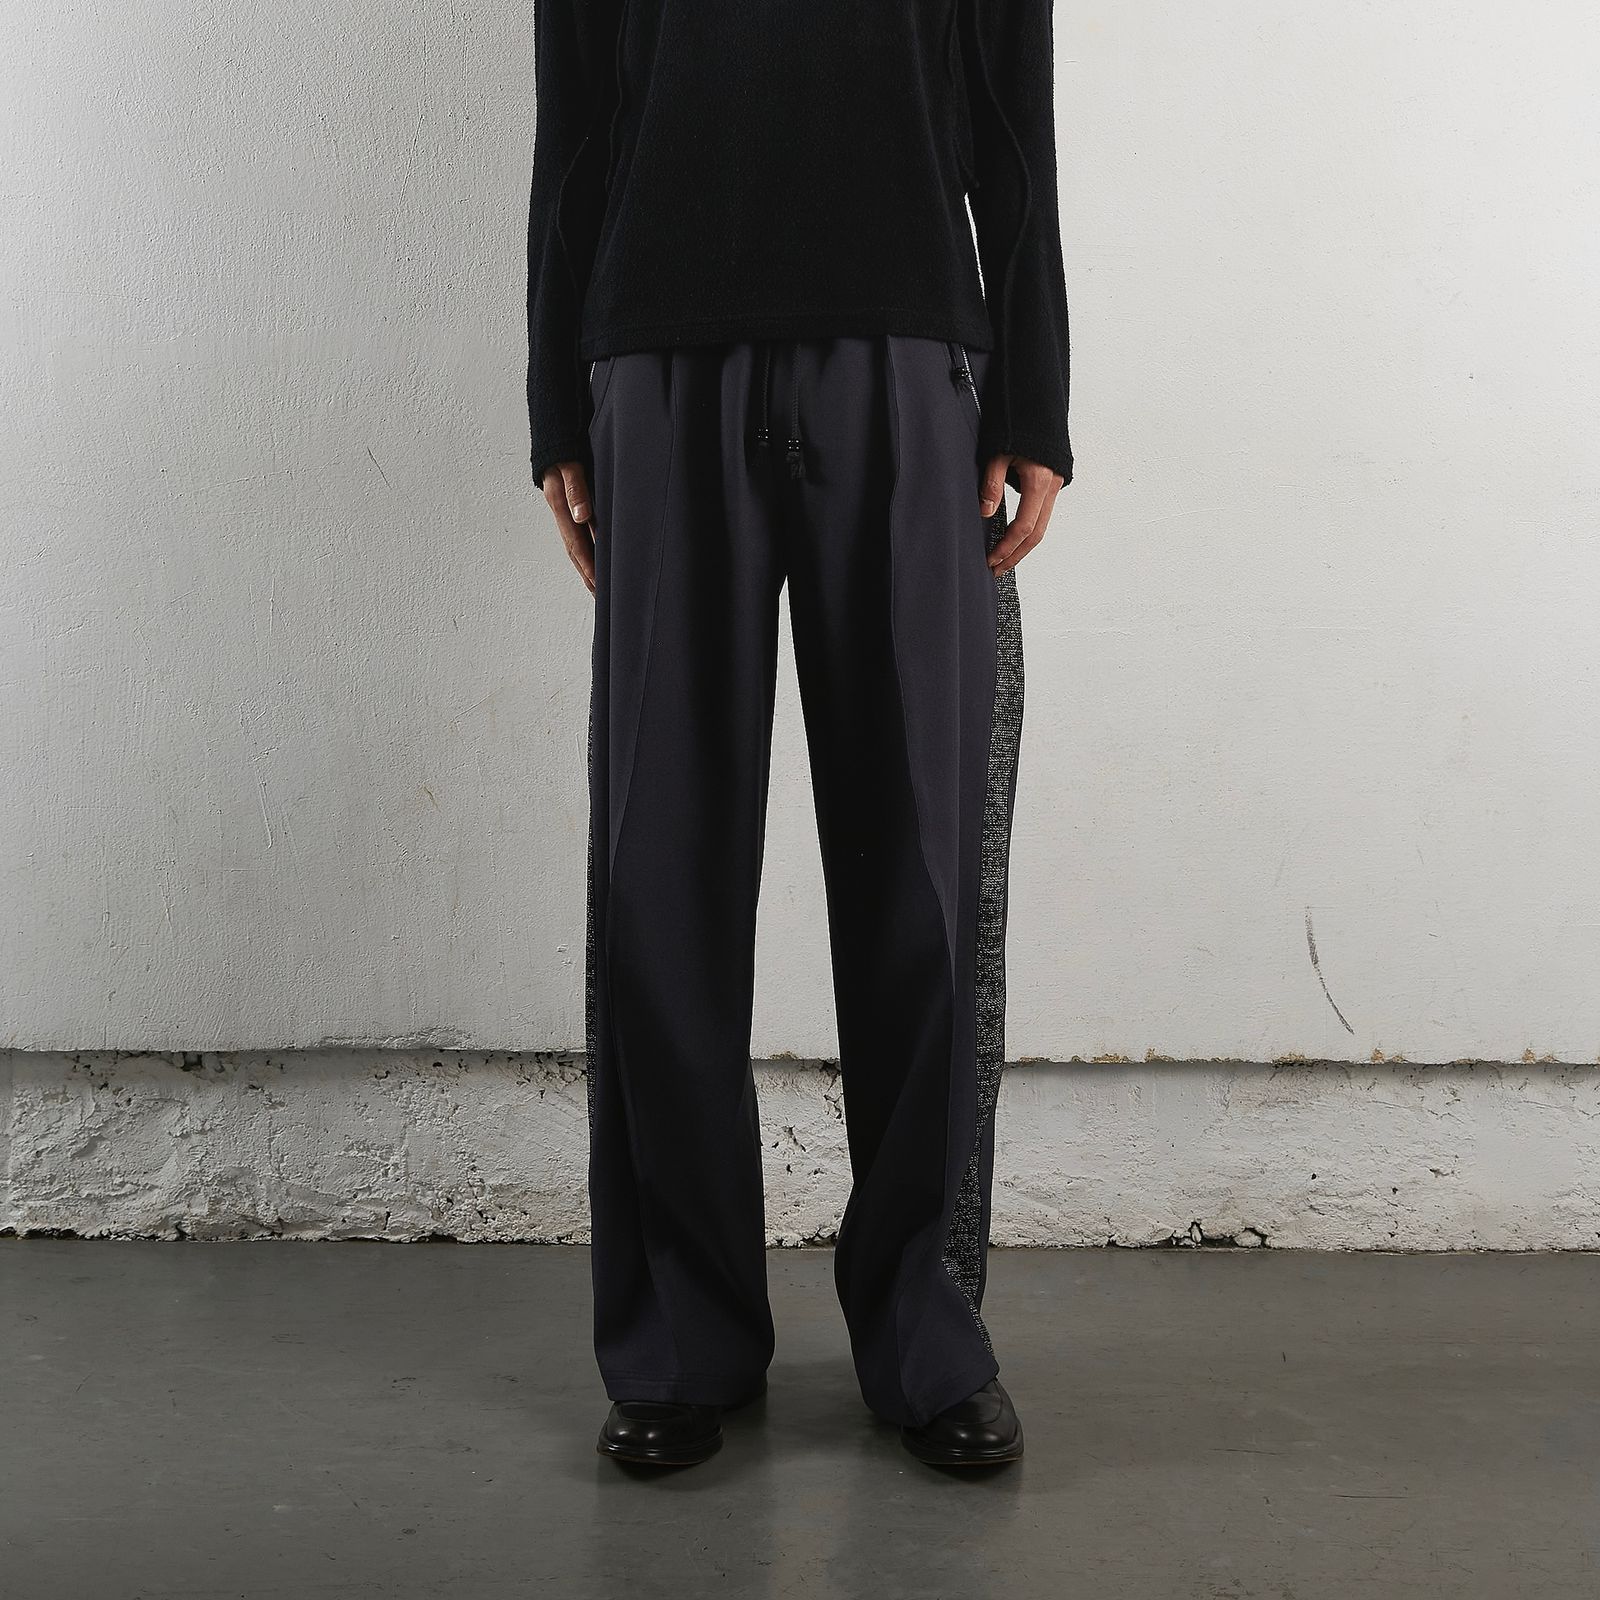 NVRFRGT - 【残りわずか】S-curved Wide Leg Utility Track Pants ...